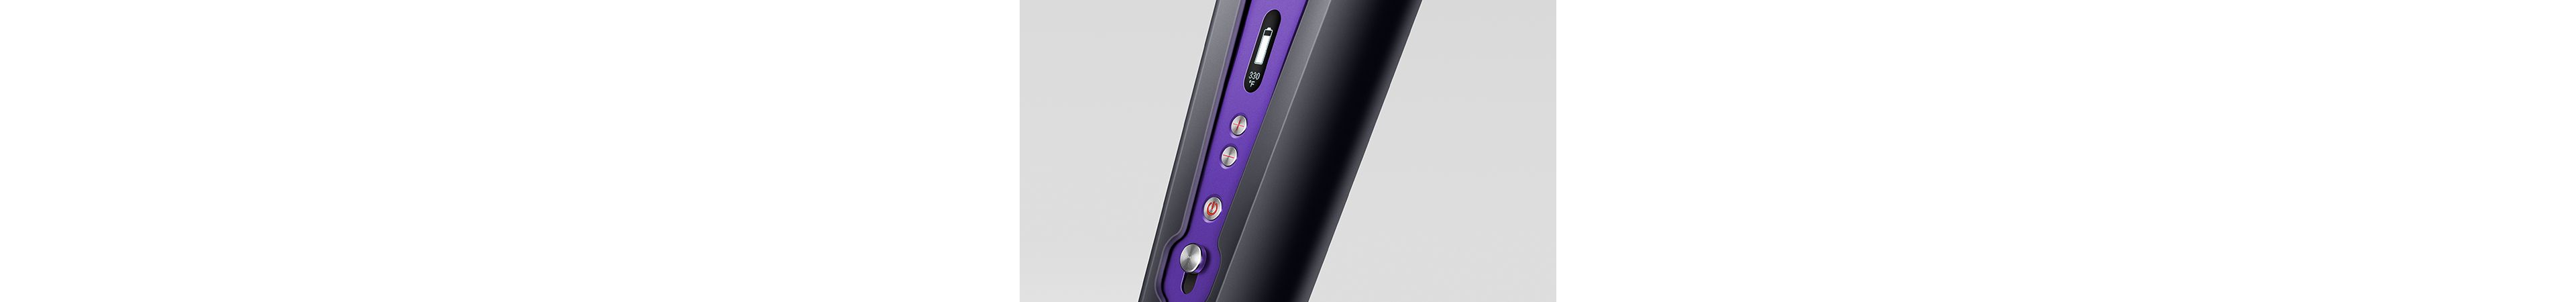 Dyson Corrale hair straightener charging socket and battery charge display